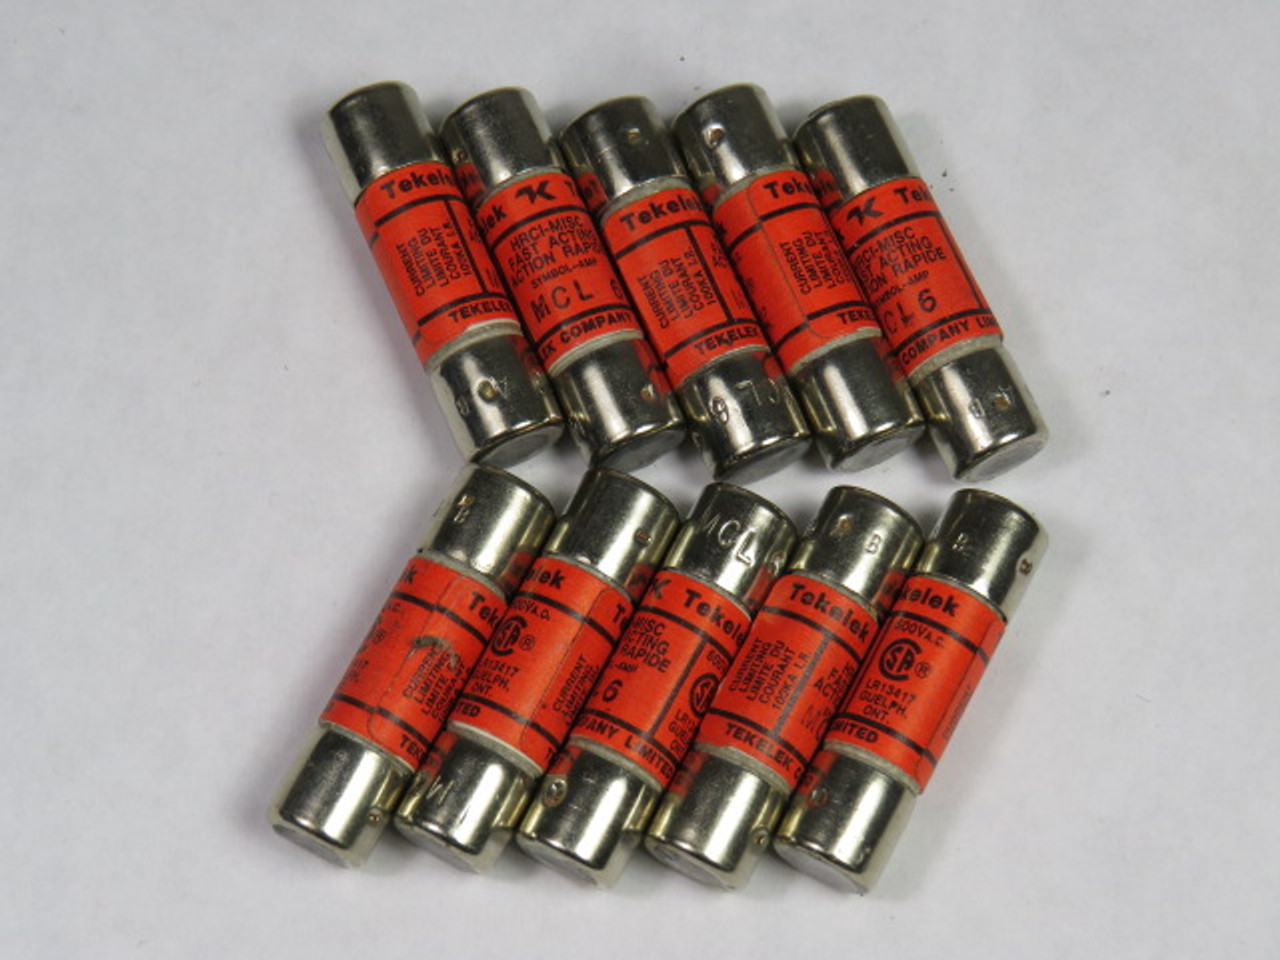 Tekelek MCL6 Fast Acting Fuse 6A 600V Lot of 10 USED